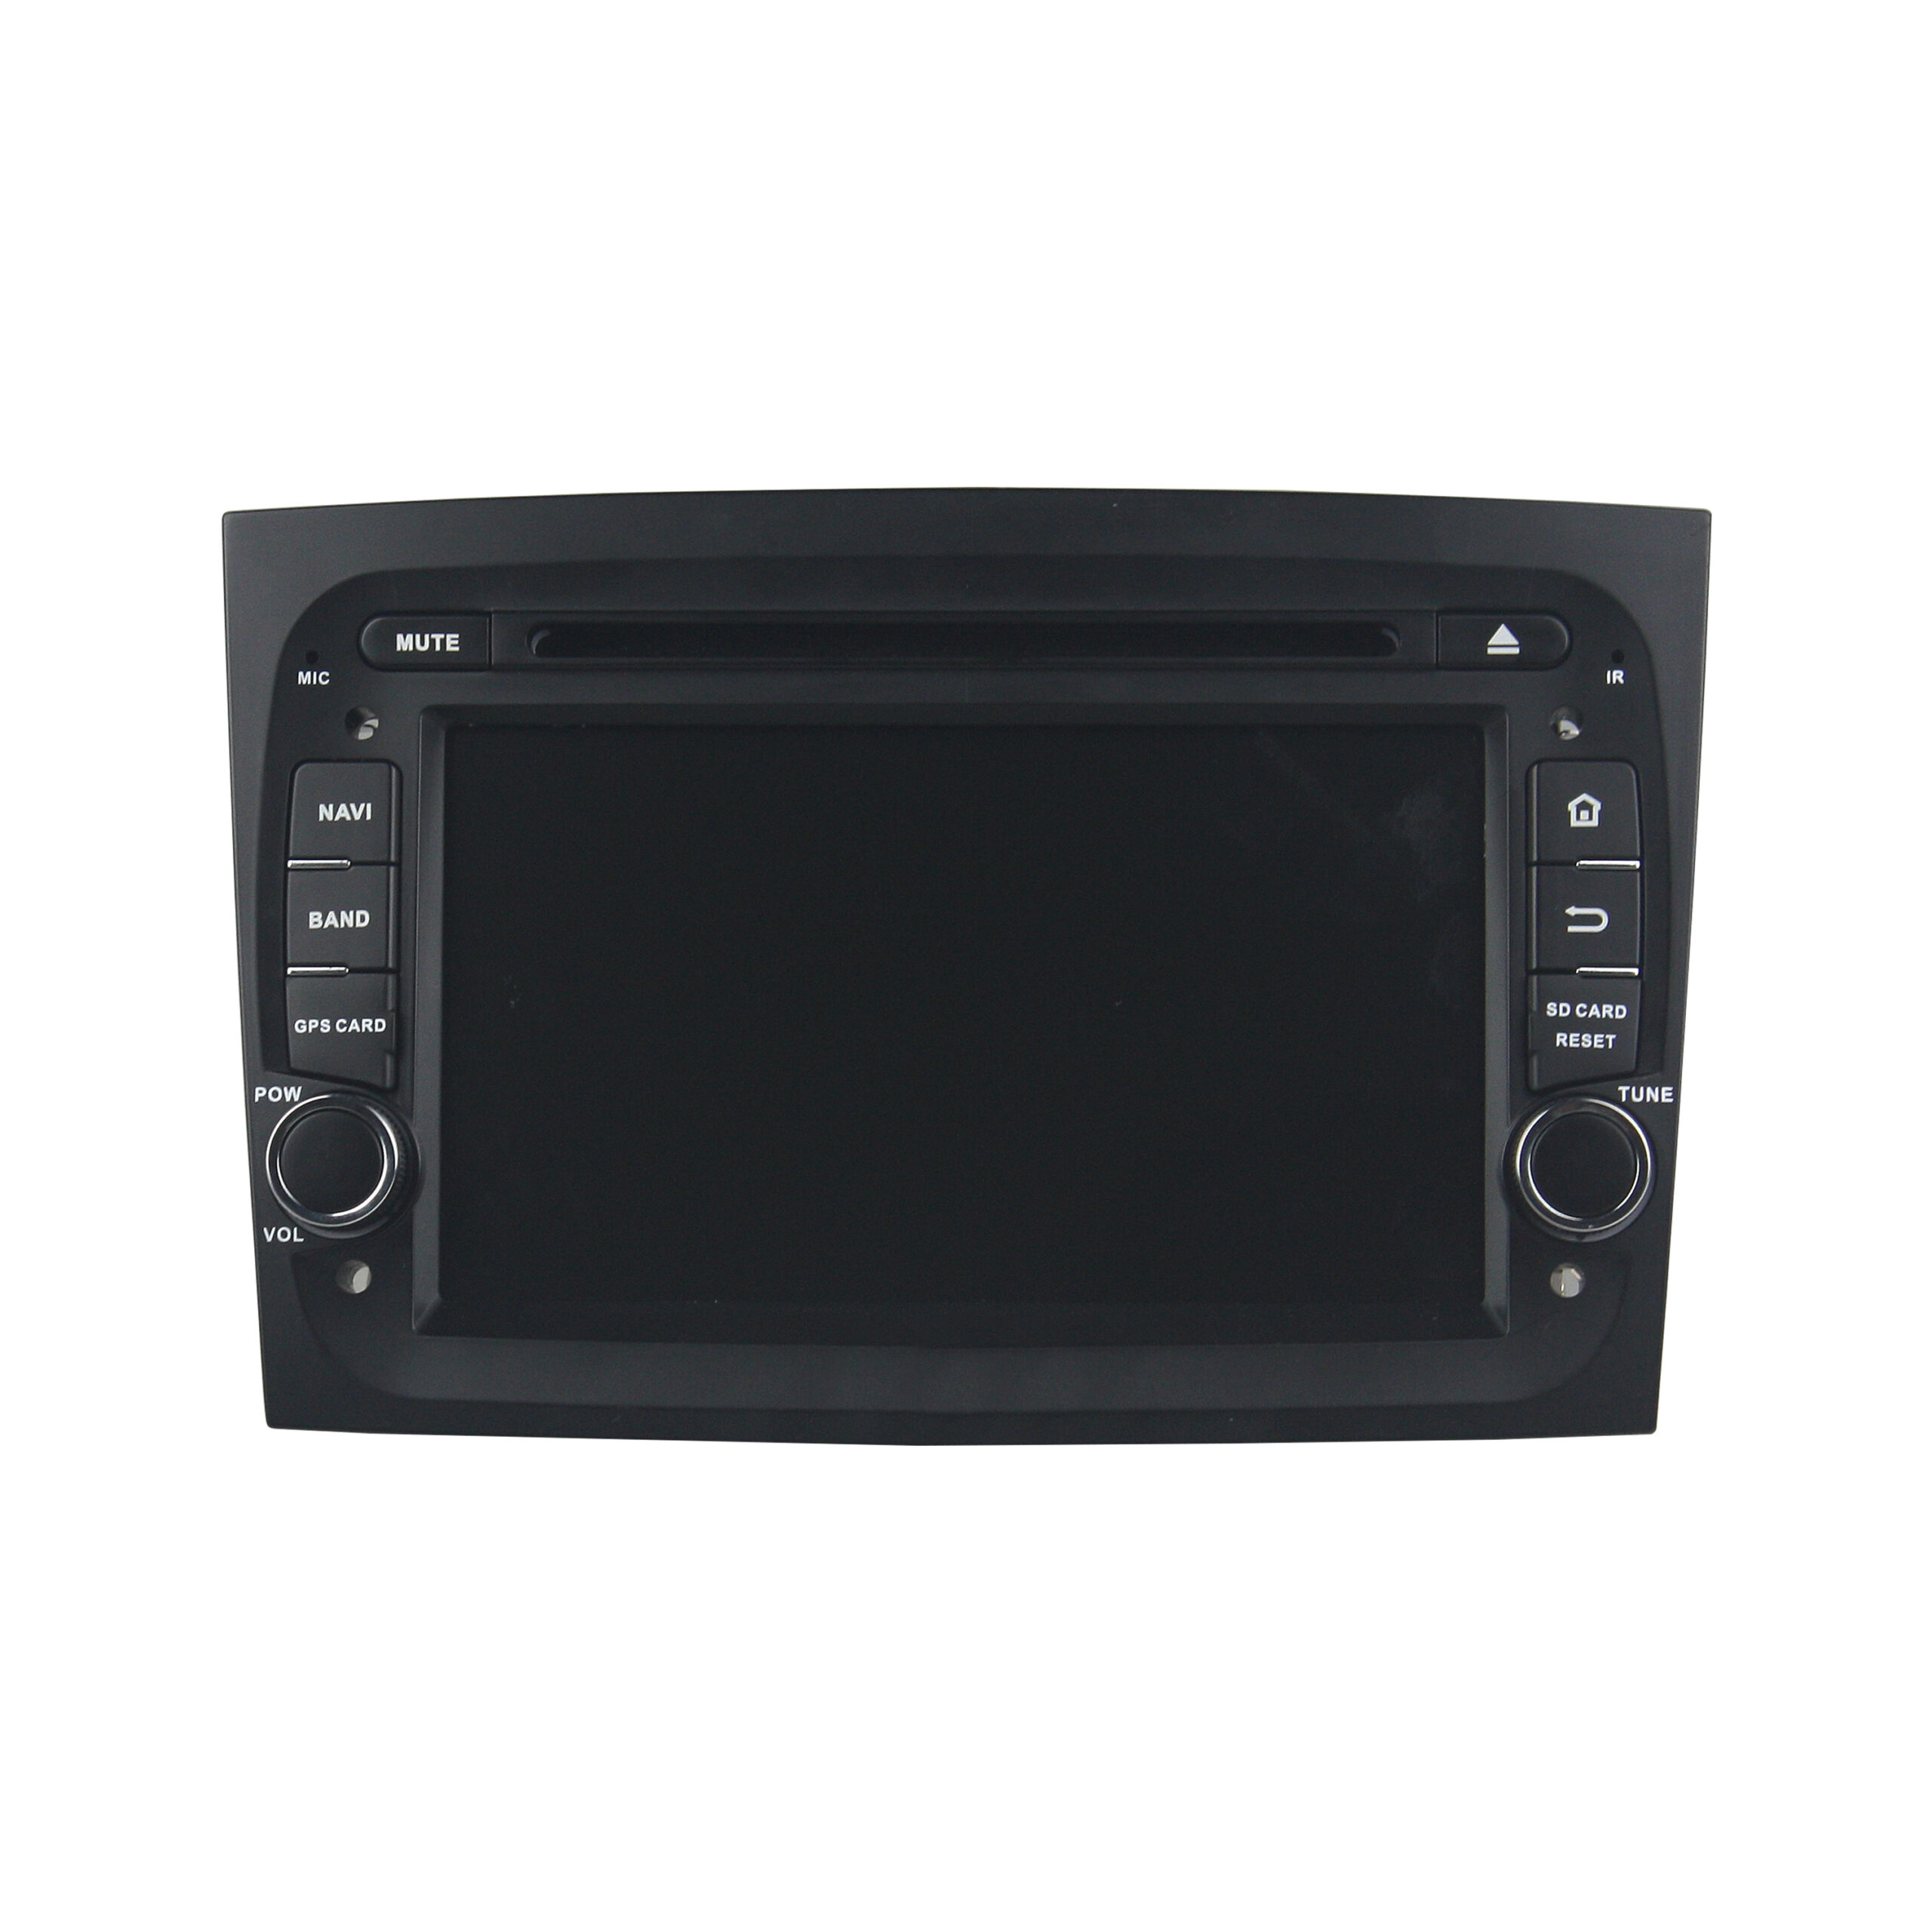 KD-7068 Car Stereo Android System Player OEM Car Radio for Doblo 2015-2018